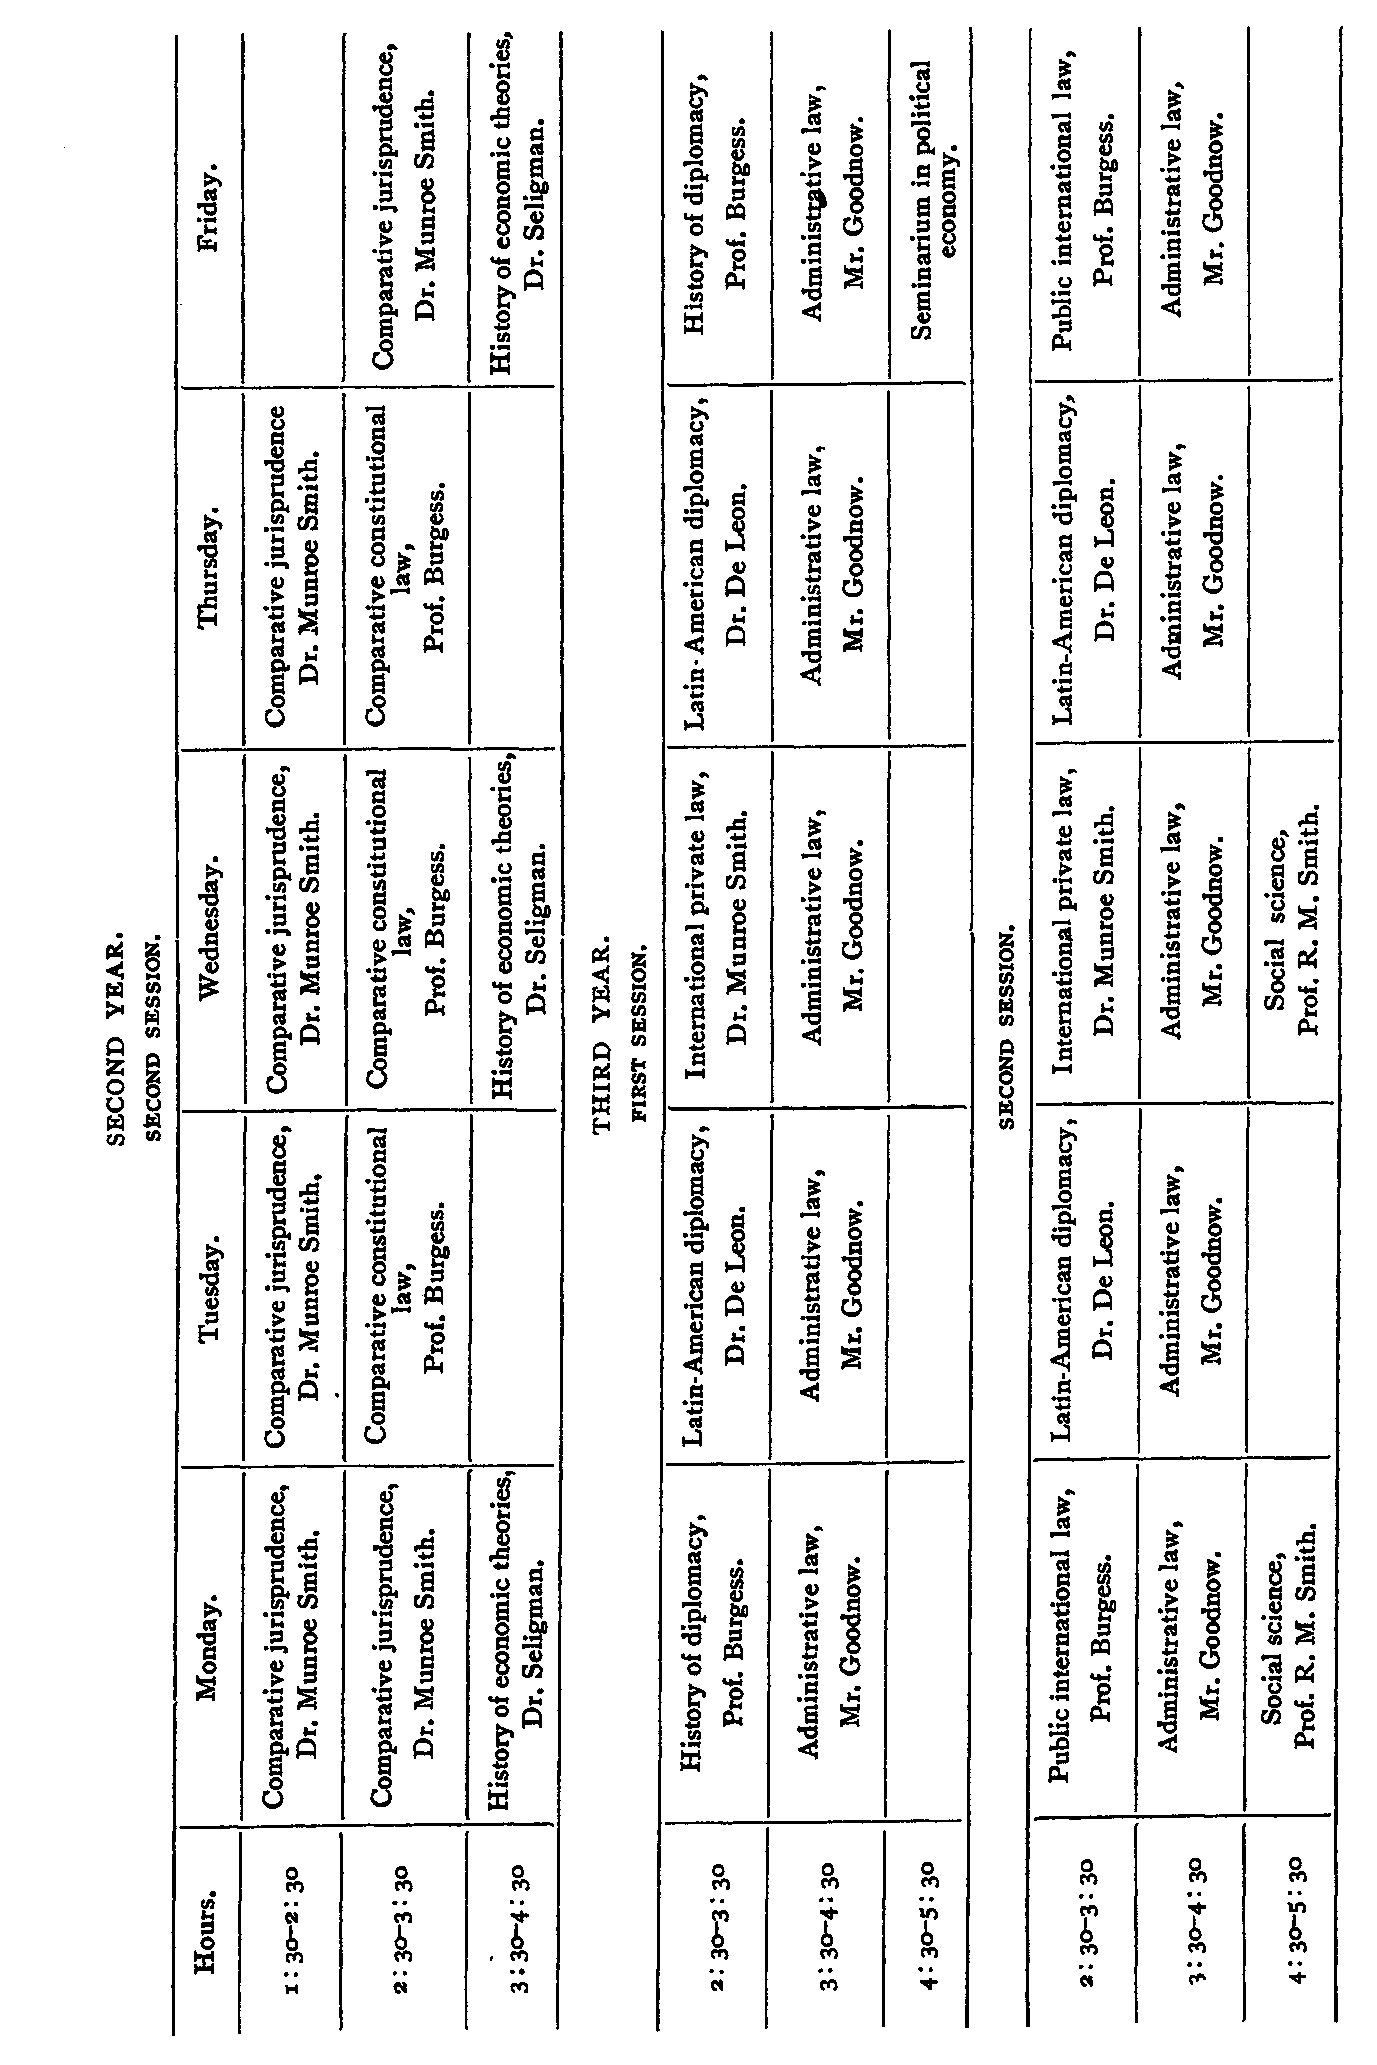 Course Schedule for Columbia in 1900